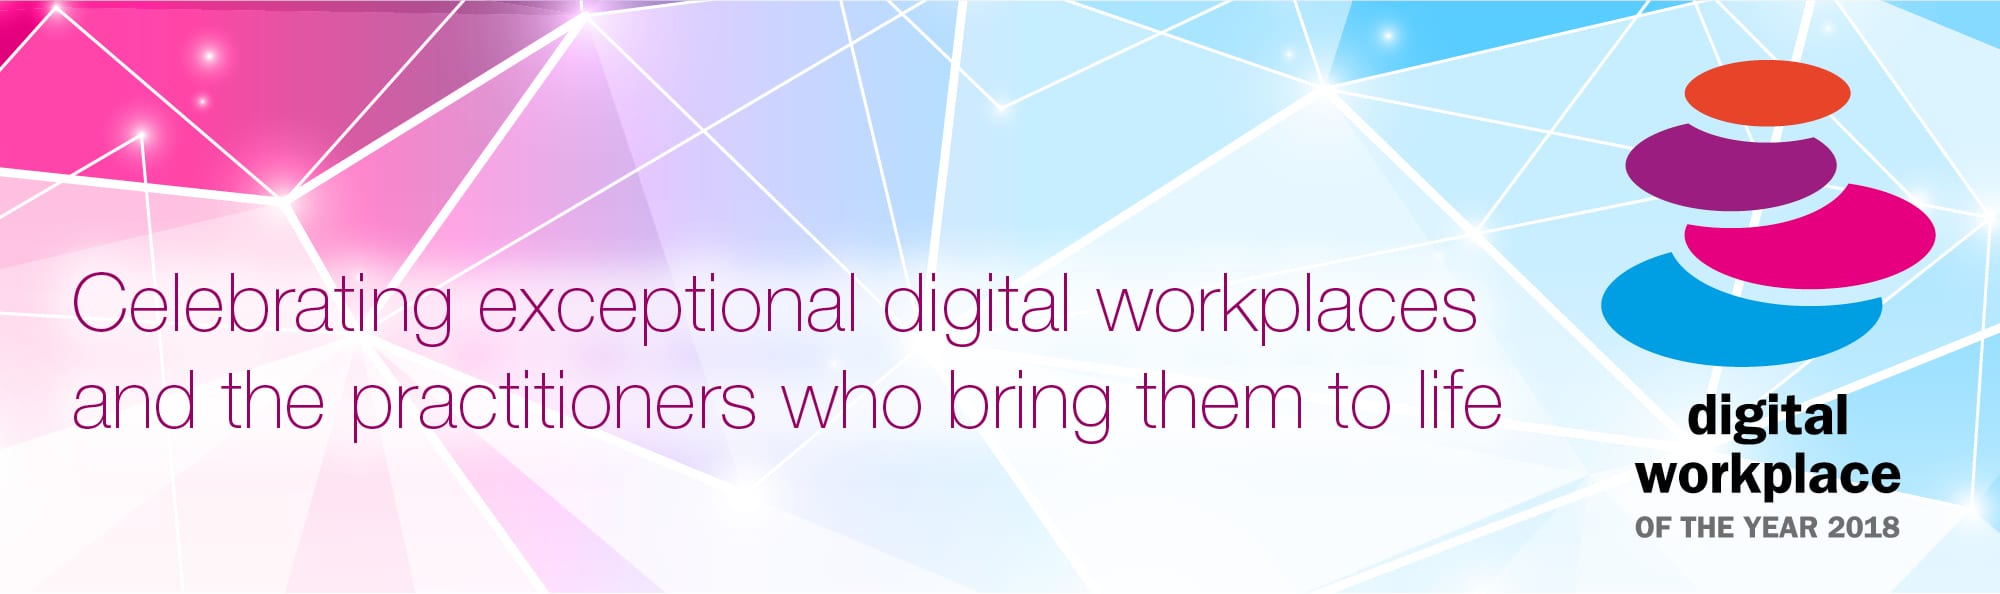 Digital Workplace of the Year Award 2018